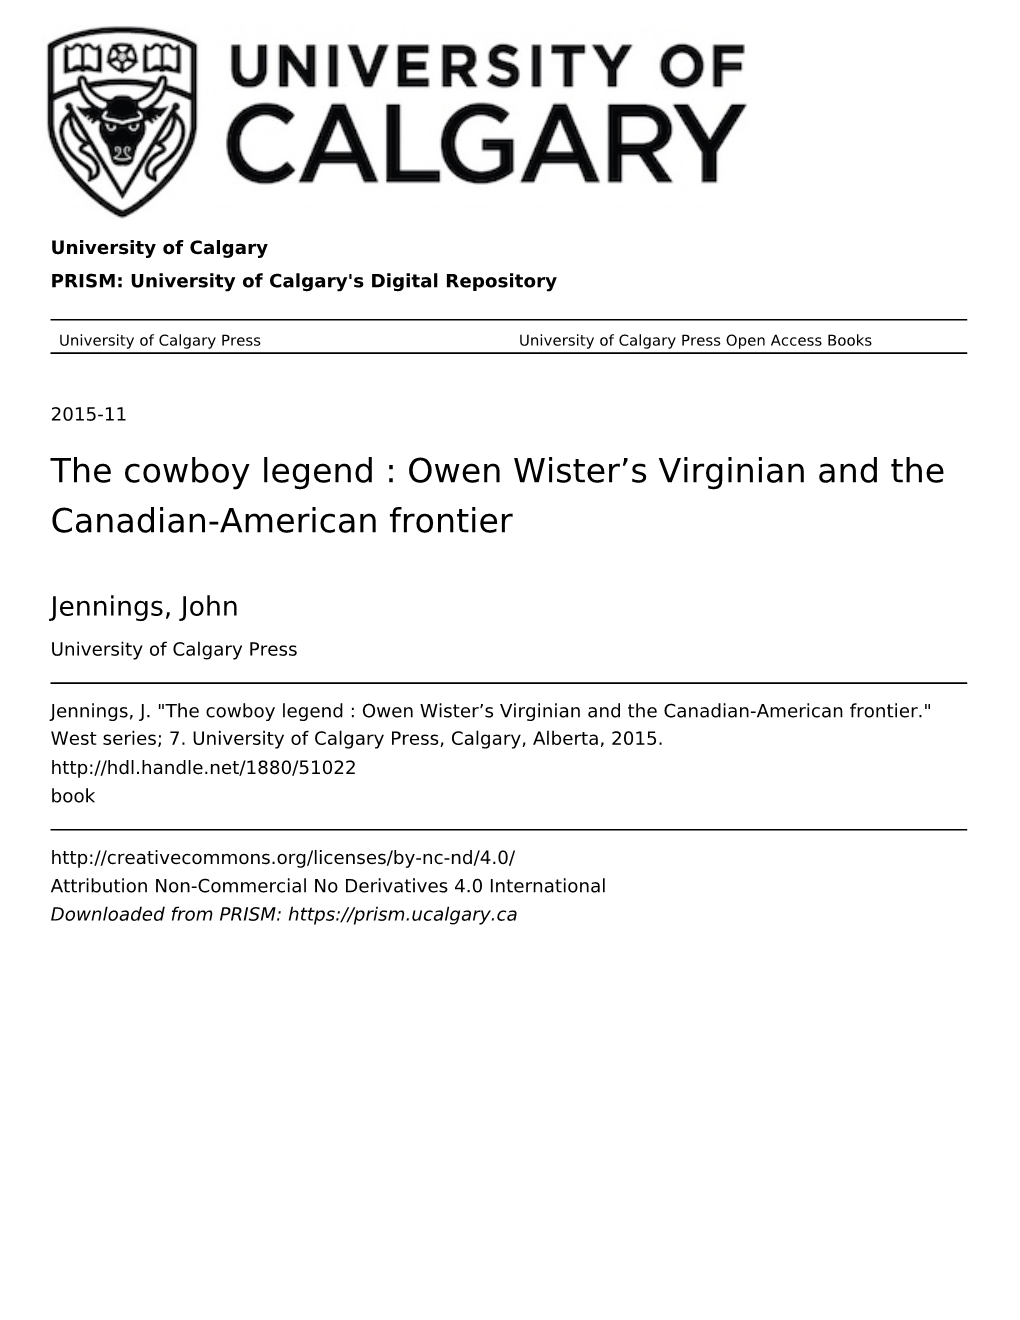 The Cowboy Legend : Owen Wister’S Virginian and the Canadian-American Frontier